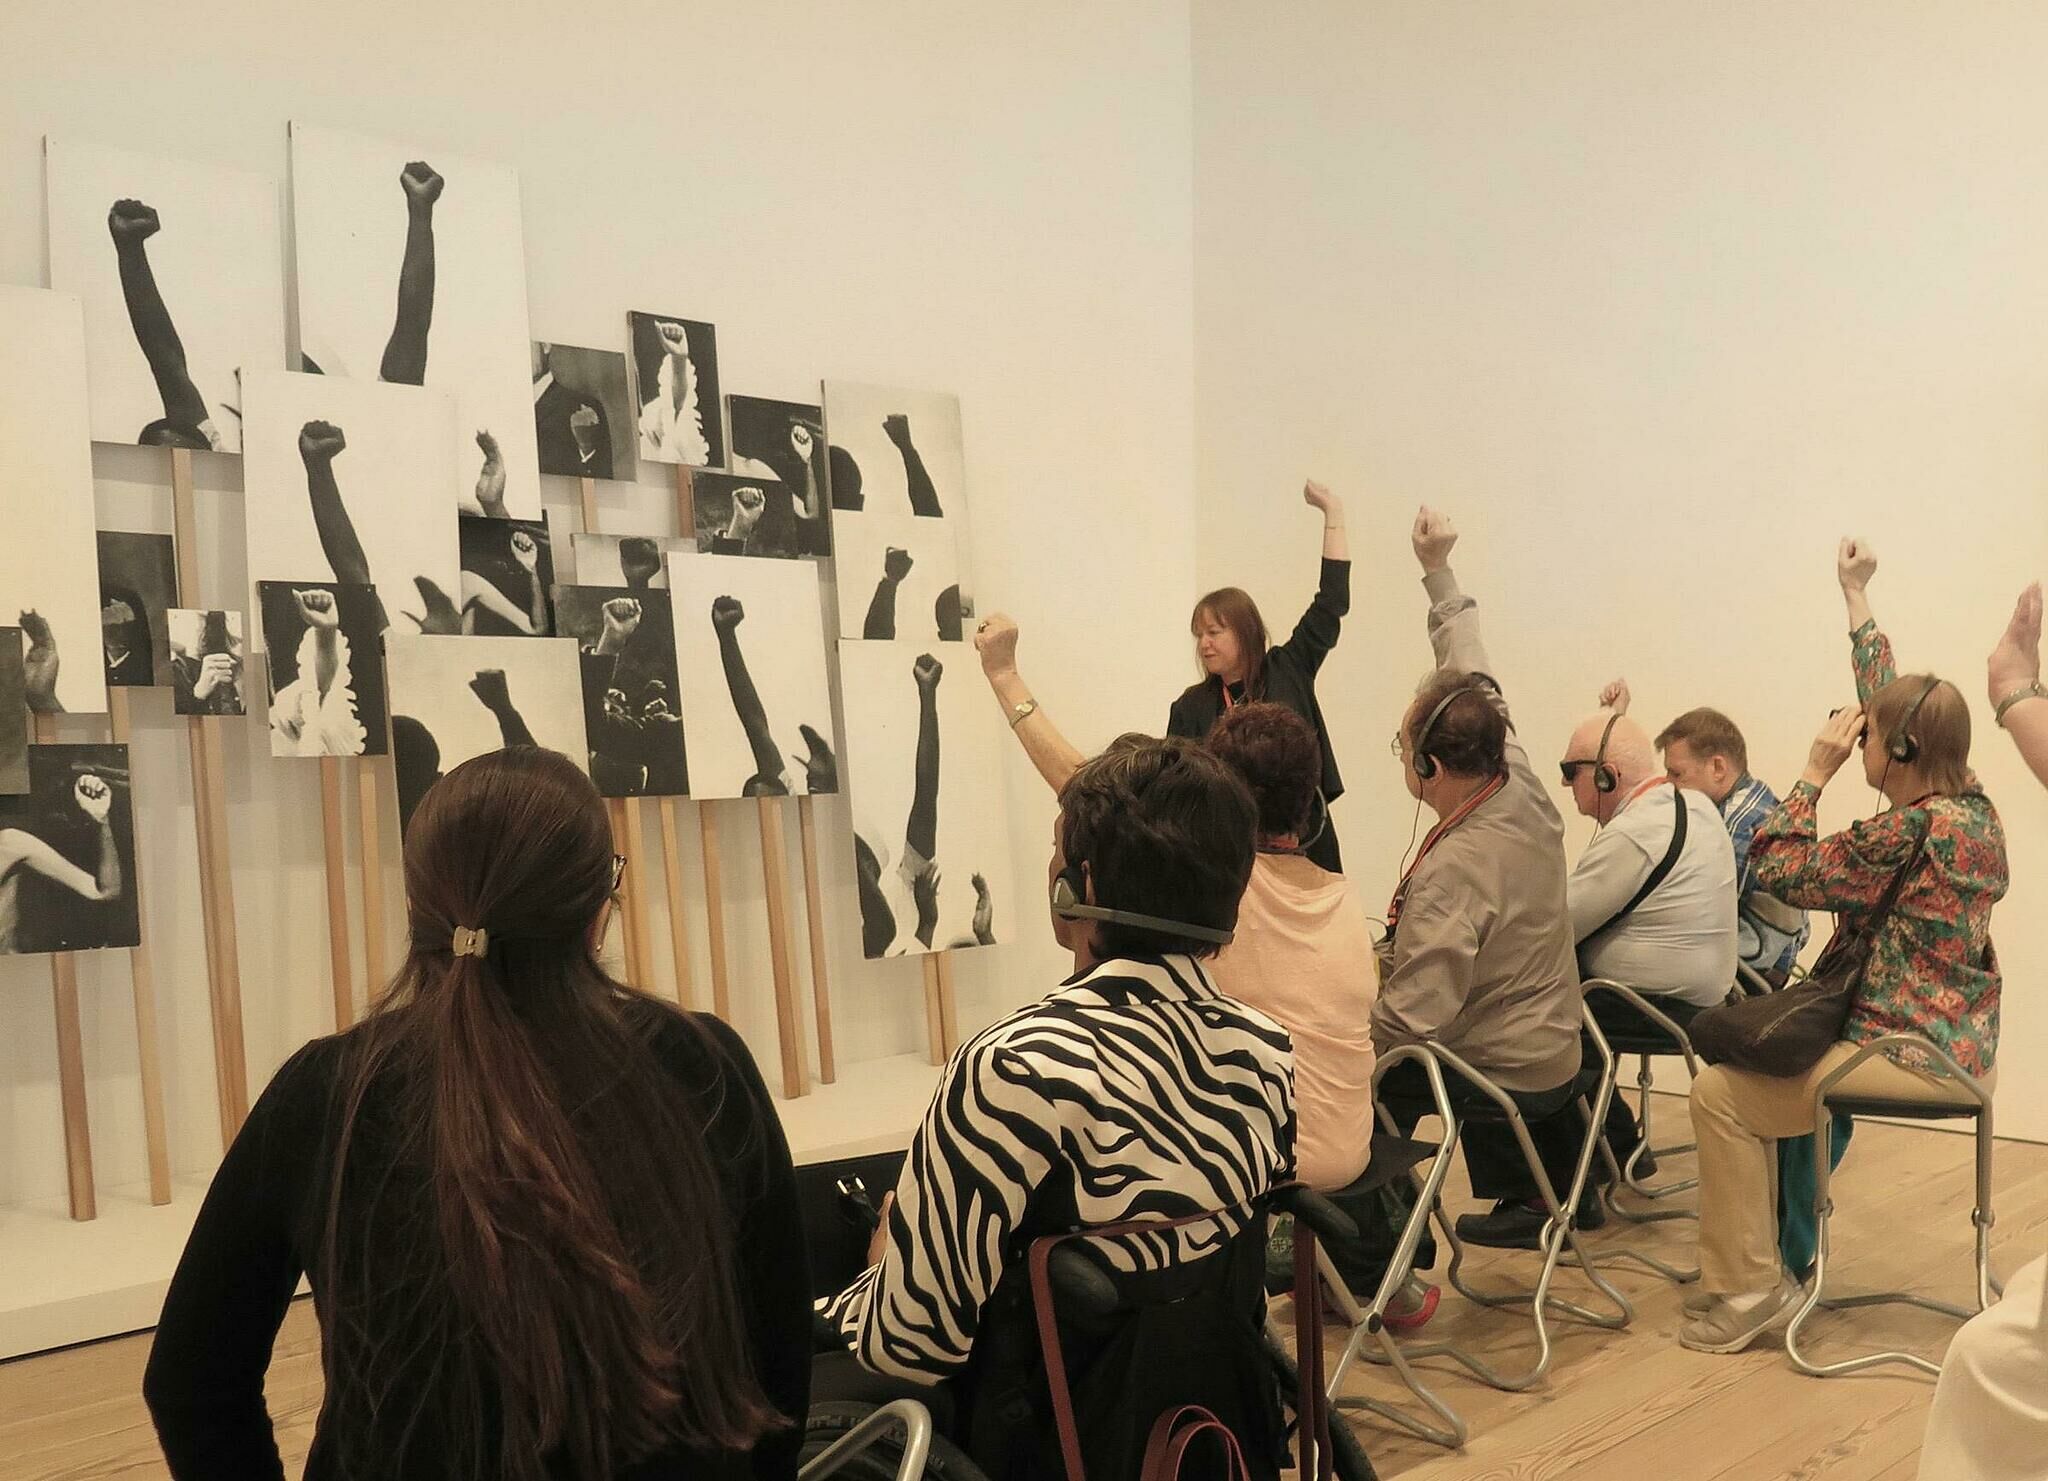 People sit down and raise their hands in the gallery